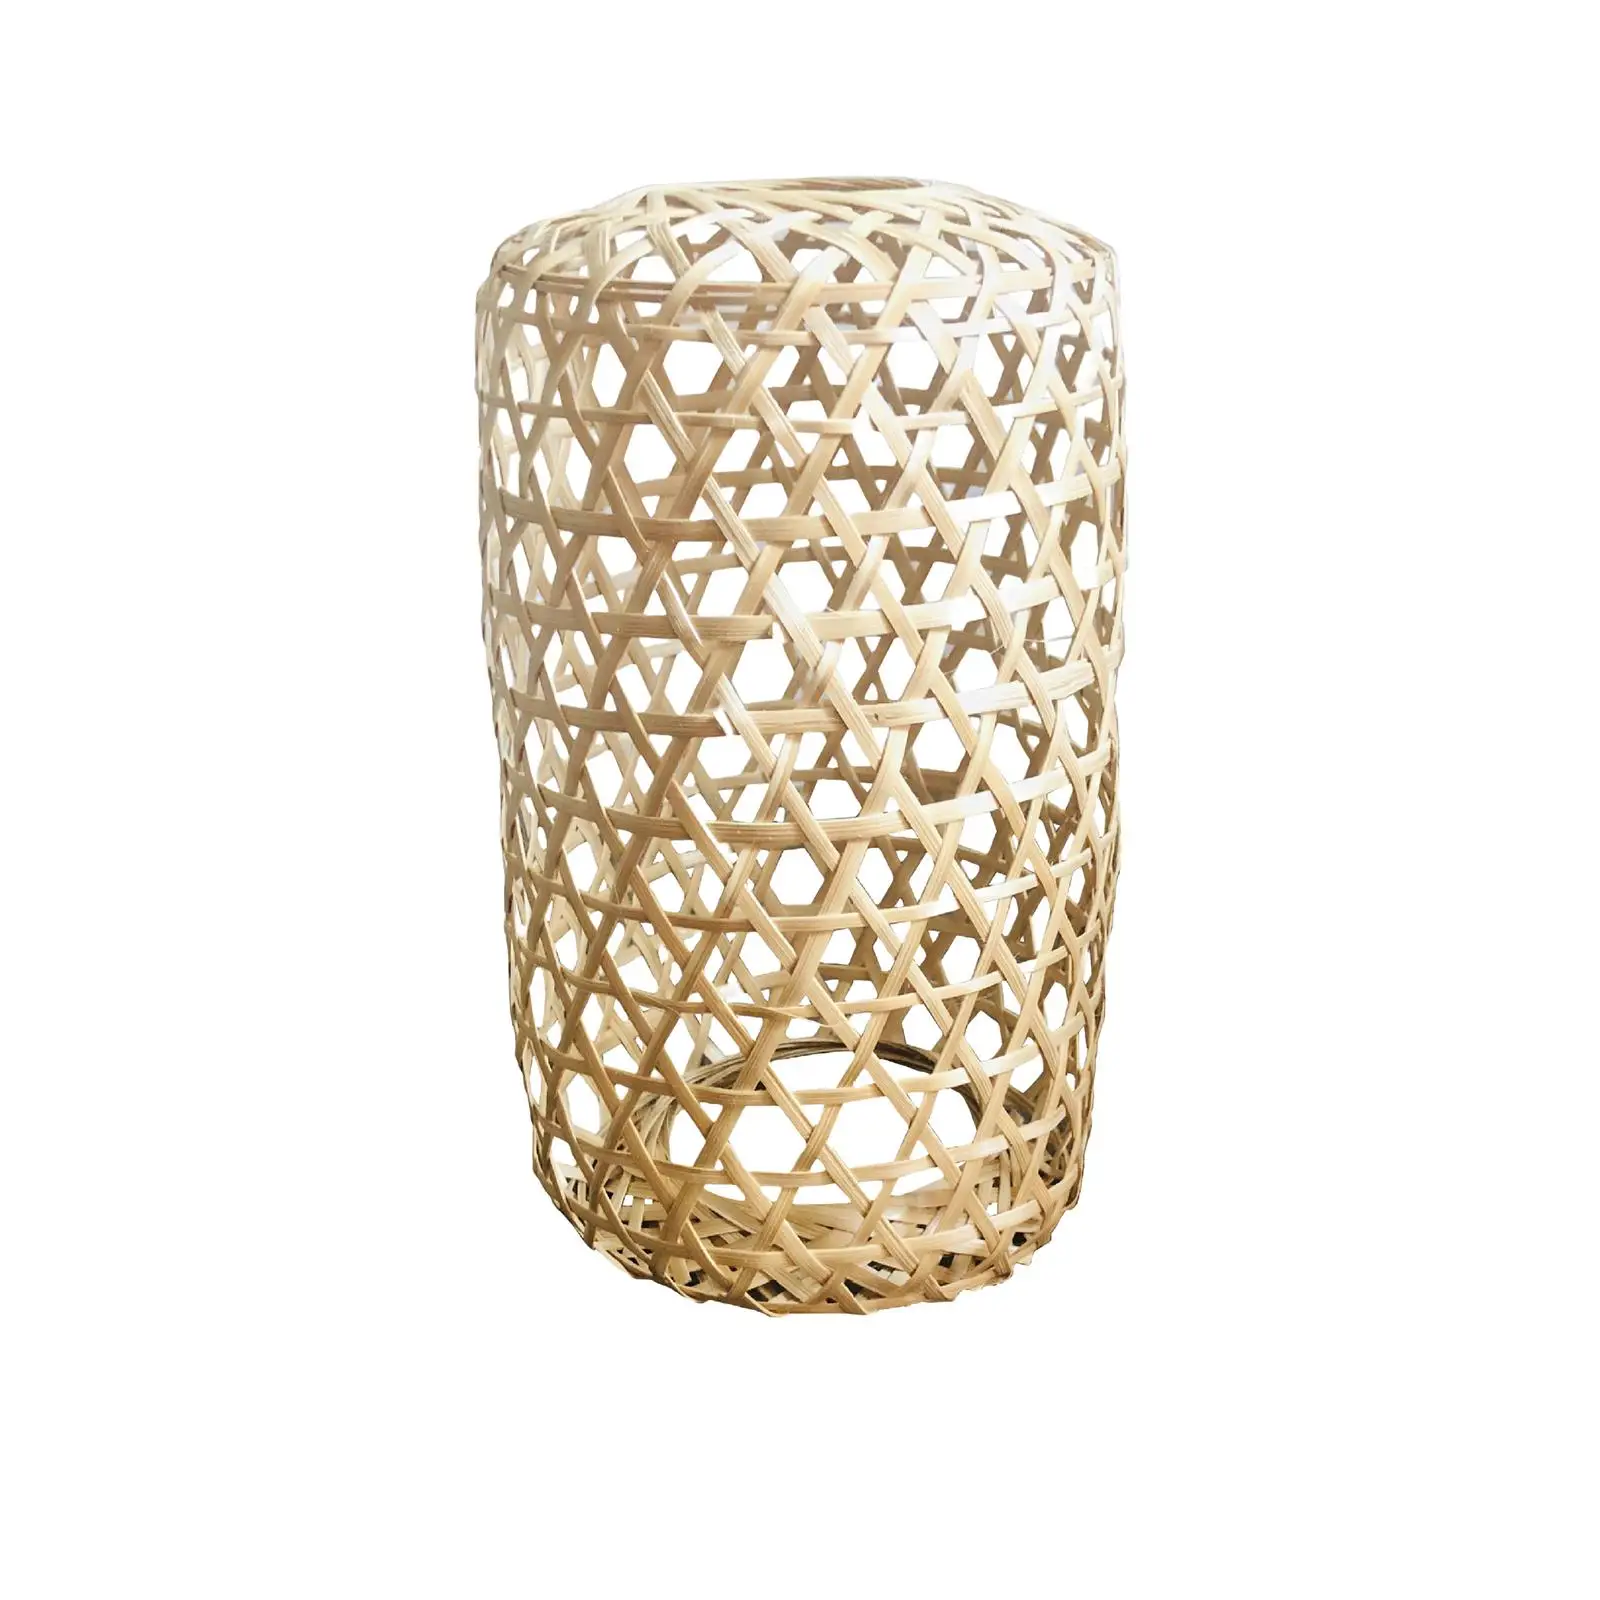 Hand Weaving Bamboo Lamp Shade Home Decor Retro for table Lamp Bedroom